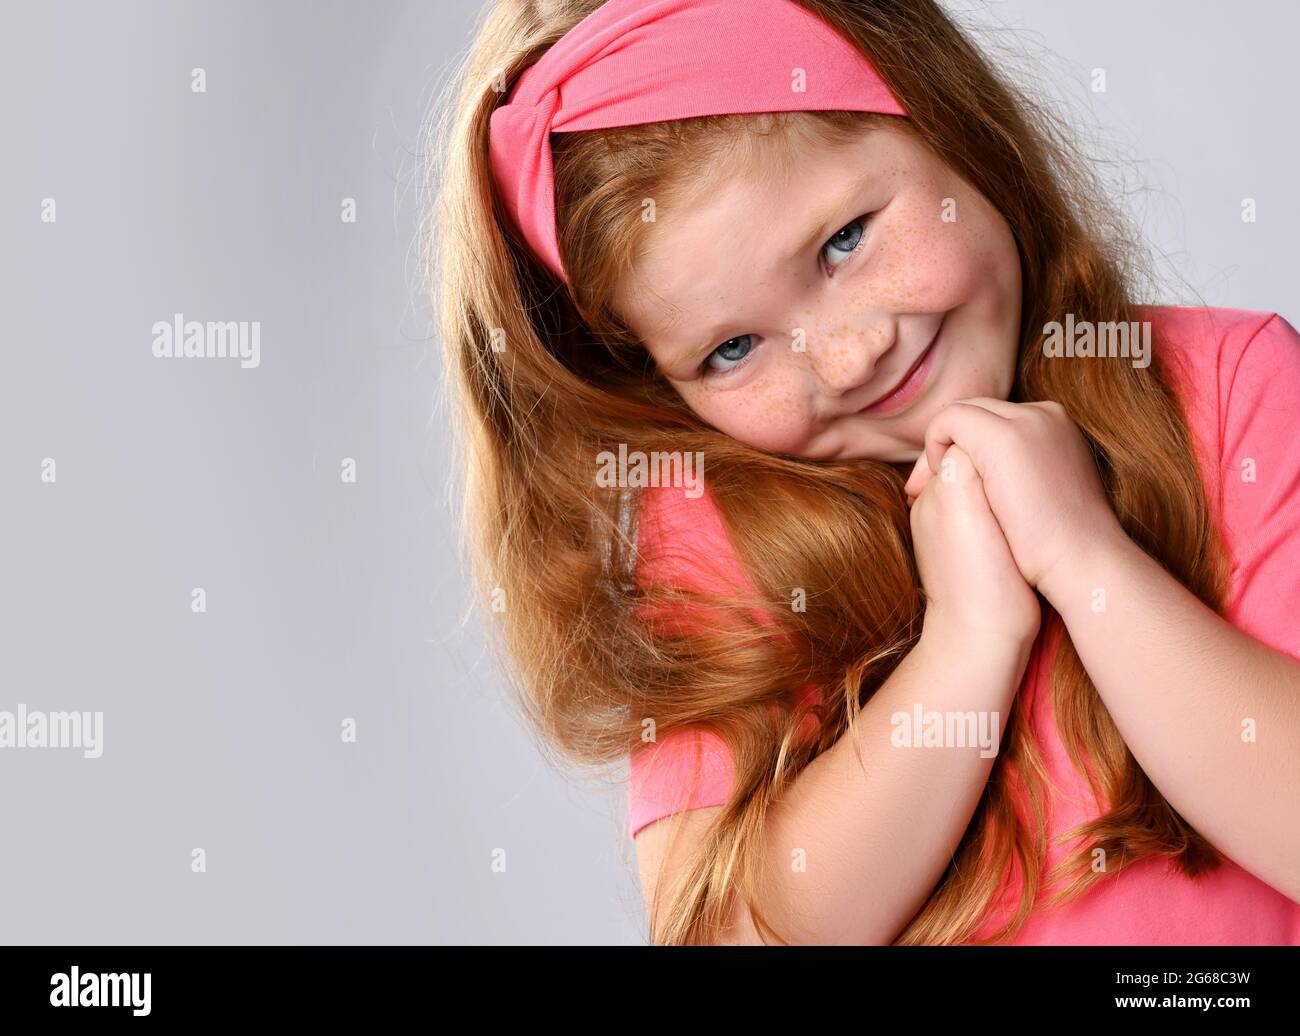 Portrait of cute, sly smiling redhead kid girl with freckles on face in pink t-shirt and headband holding hands together Stock Photo